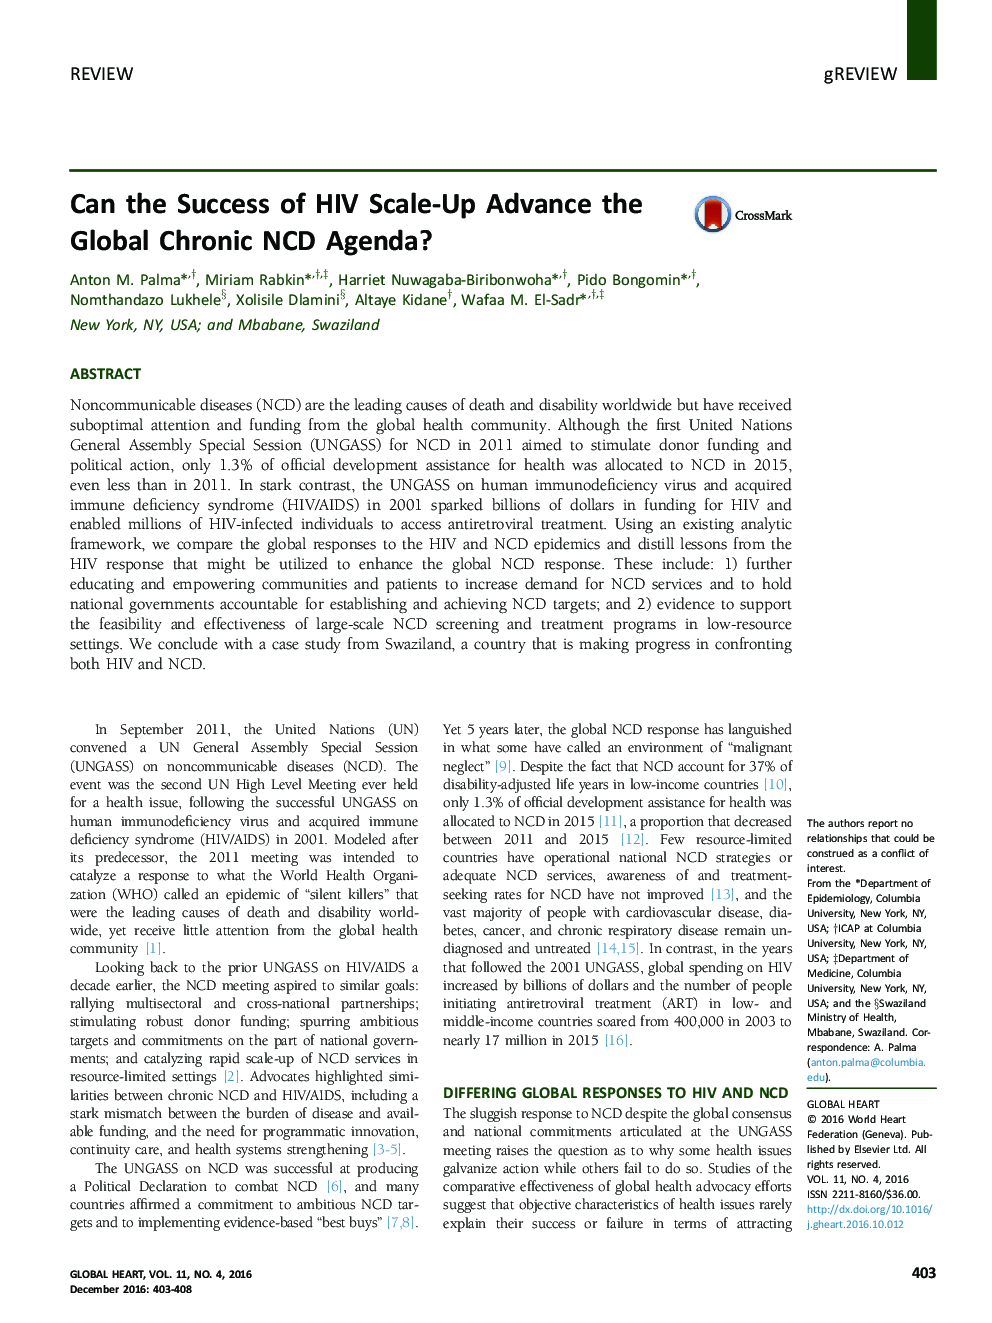 Can the Success of HIV Scale-Up Advance the Global Chronic NCD Agenda?